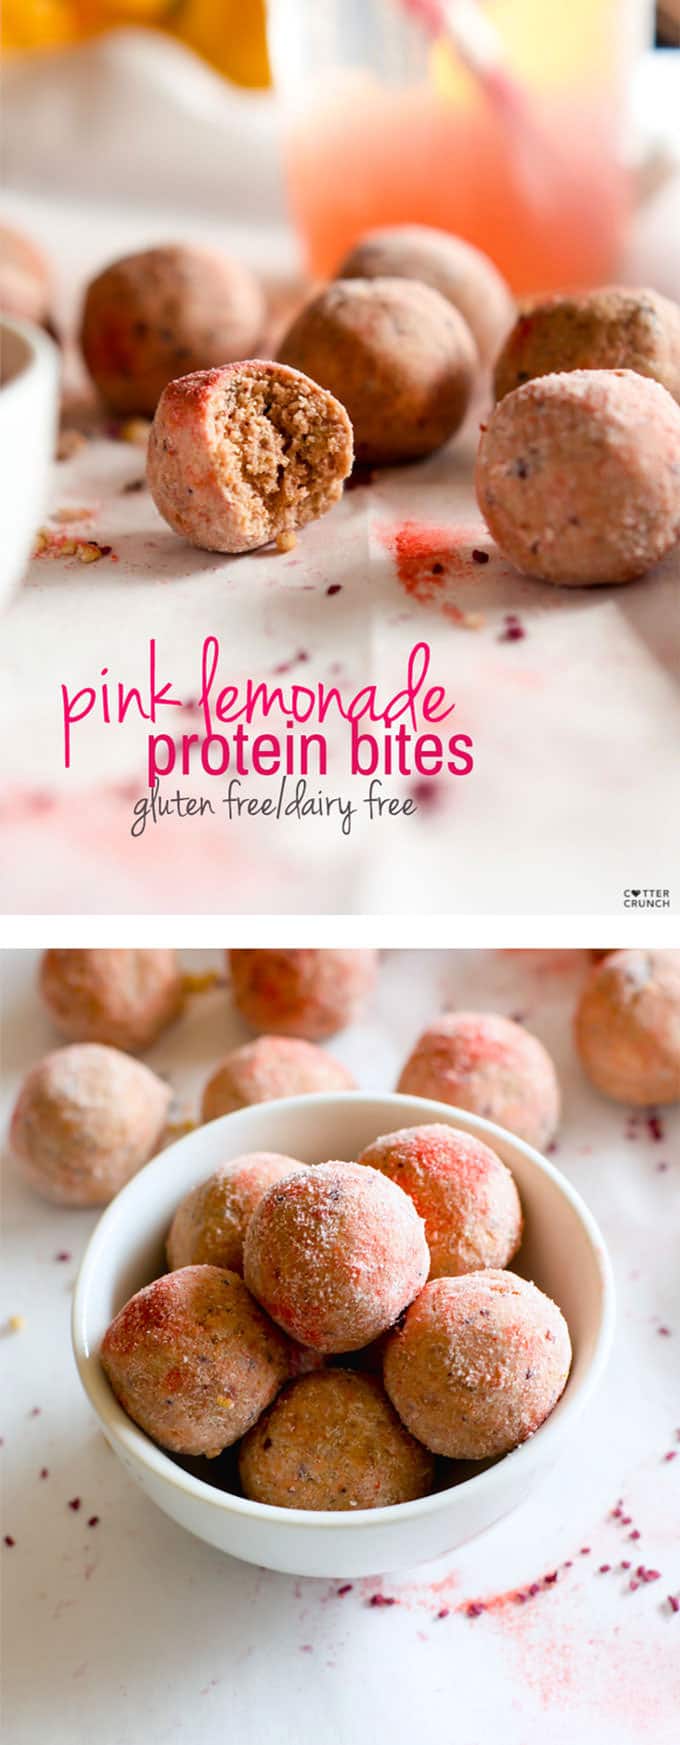 Grain Free Kid friendly Pink Lemonade Protein bites! Lemonade is Summer staple in many homes these days and these refreshing protein bites just might be another a great addition! Lower sugar, protein packed, dairy free, no bake, and Vitamin C rich! Great for snacking on the go, between sports and activities, or anytime of day!